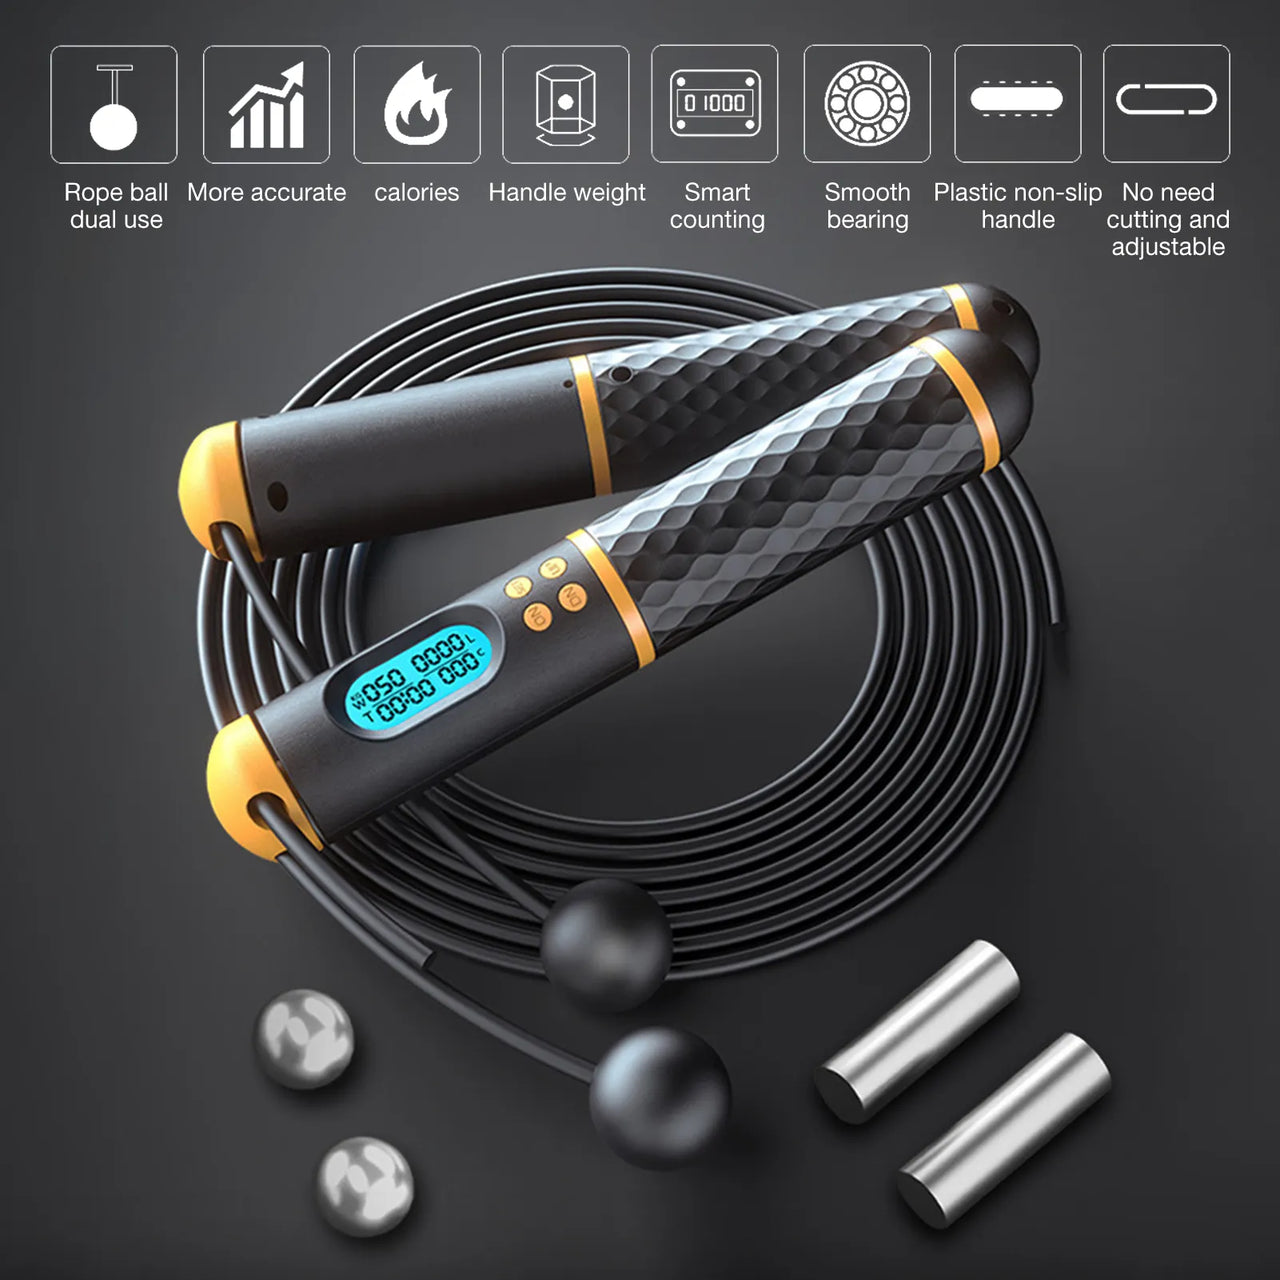 Digicord™ Skipping Rope With Digital Counter with Calorie Count🔥Last Day Special Sale 51% OFF🔥